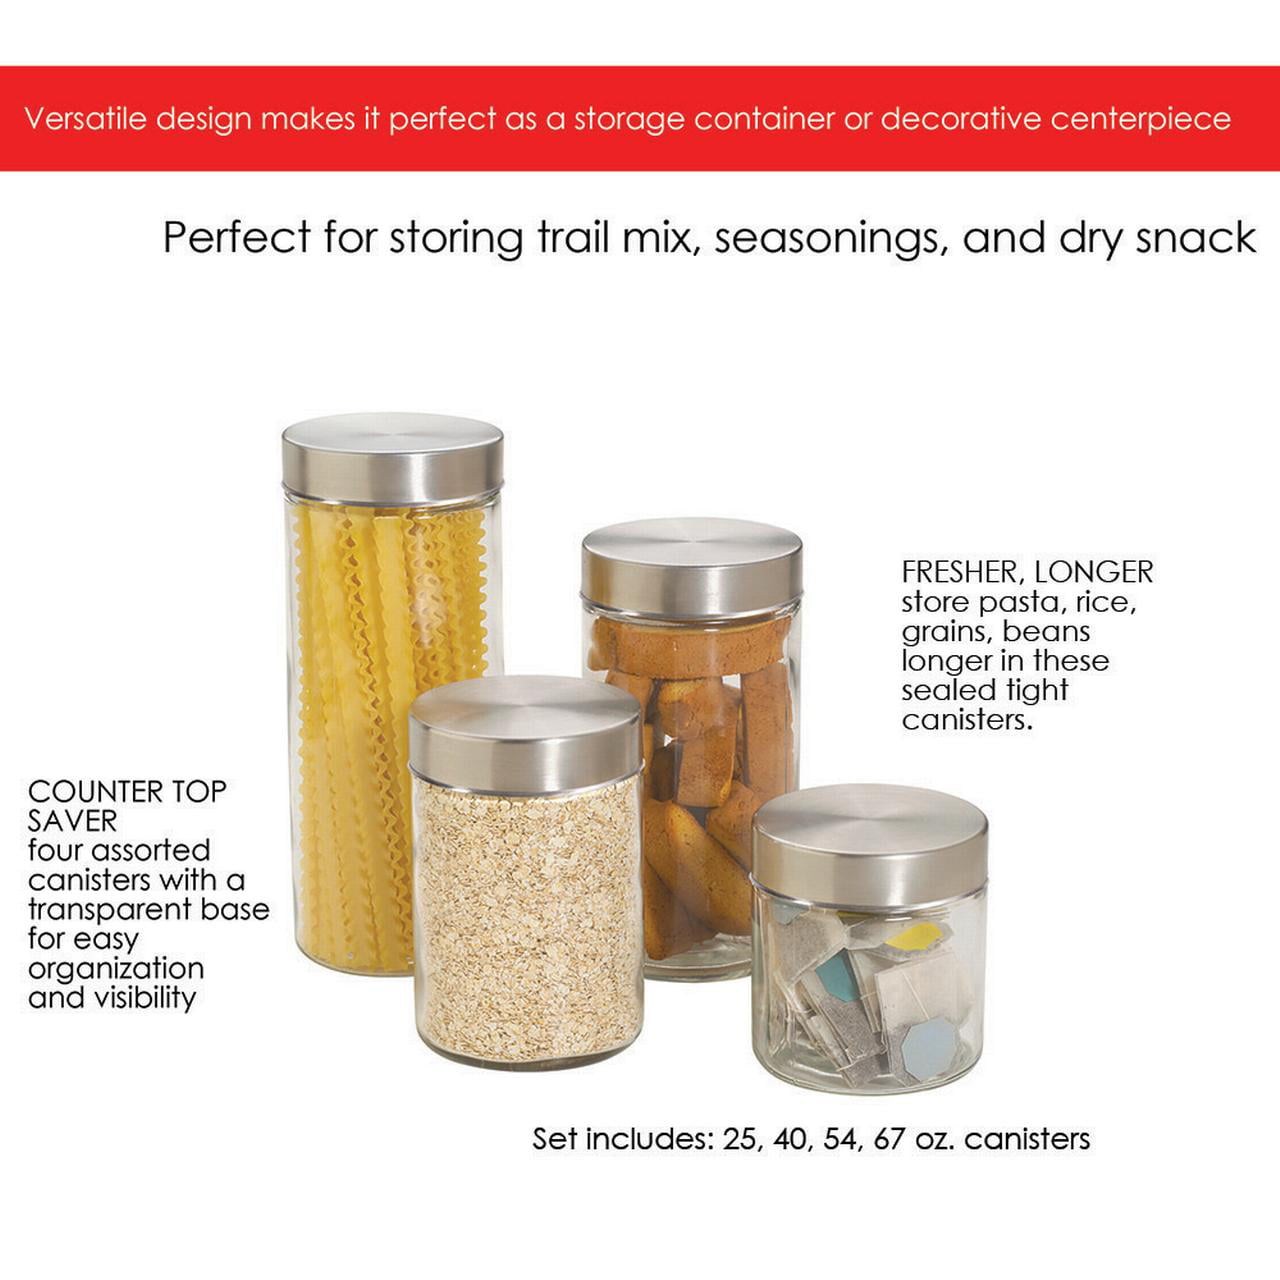 Home Basics Square Glass Canisters with Bamboo Lids (4-Piece) HDC92369 -  The Home Depot